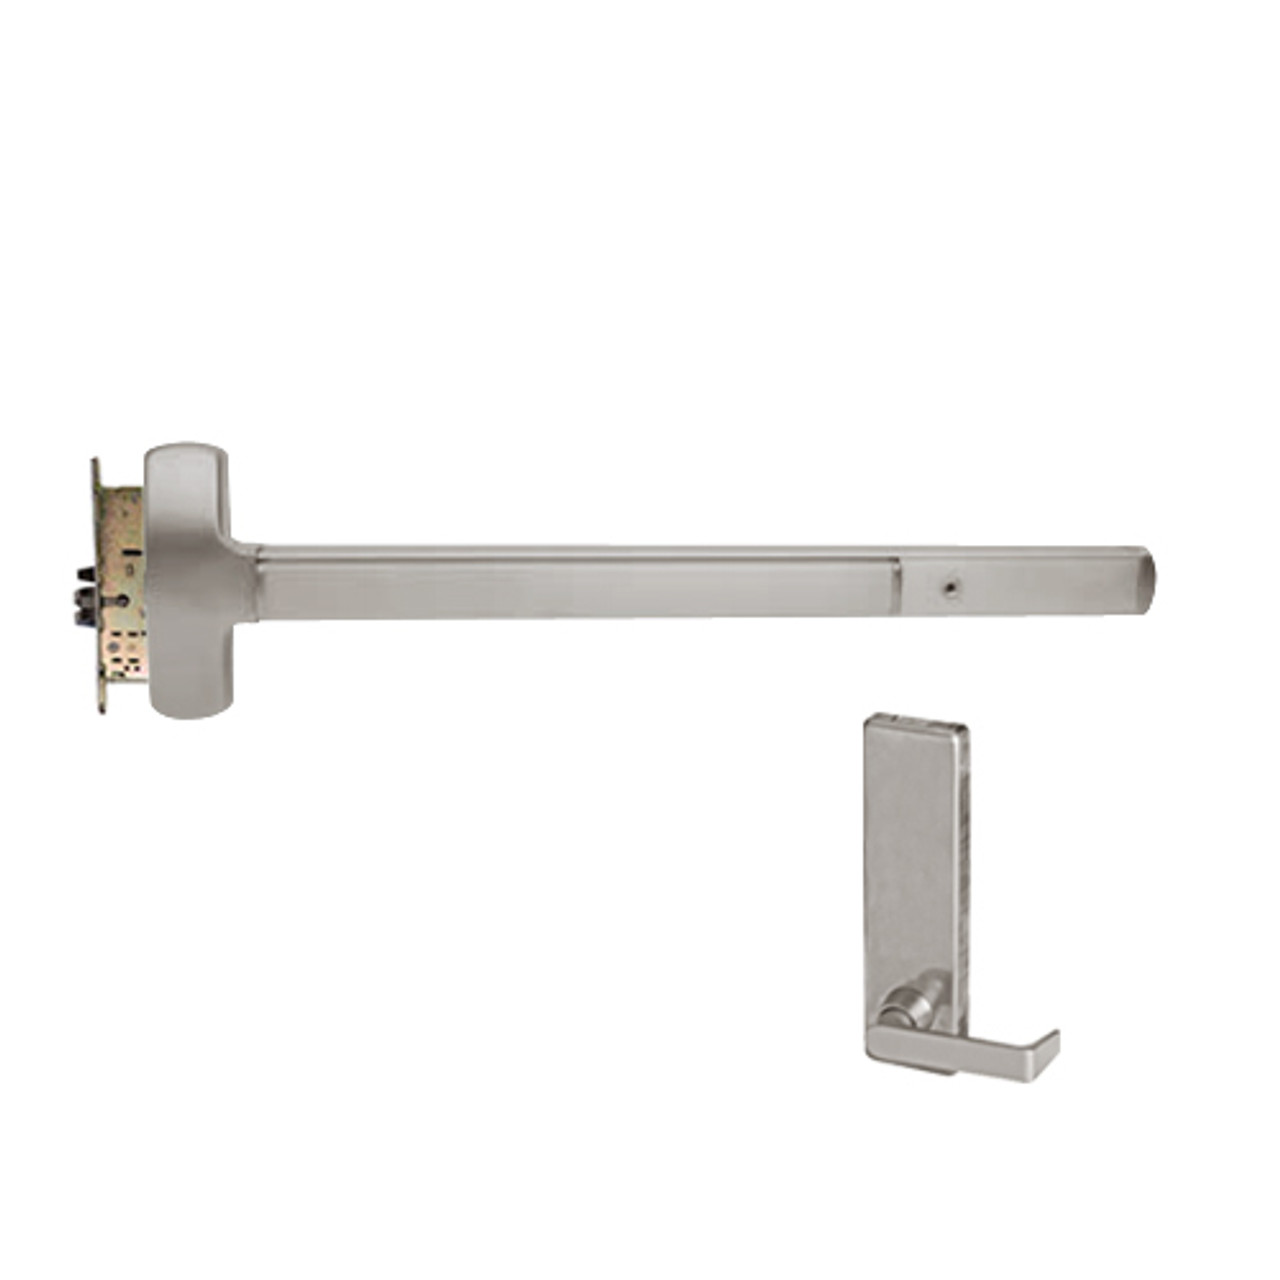 25-M-L-DT-DANE-US32D-4-LHR Falcon Exit Device in Satin Stainless Steel